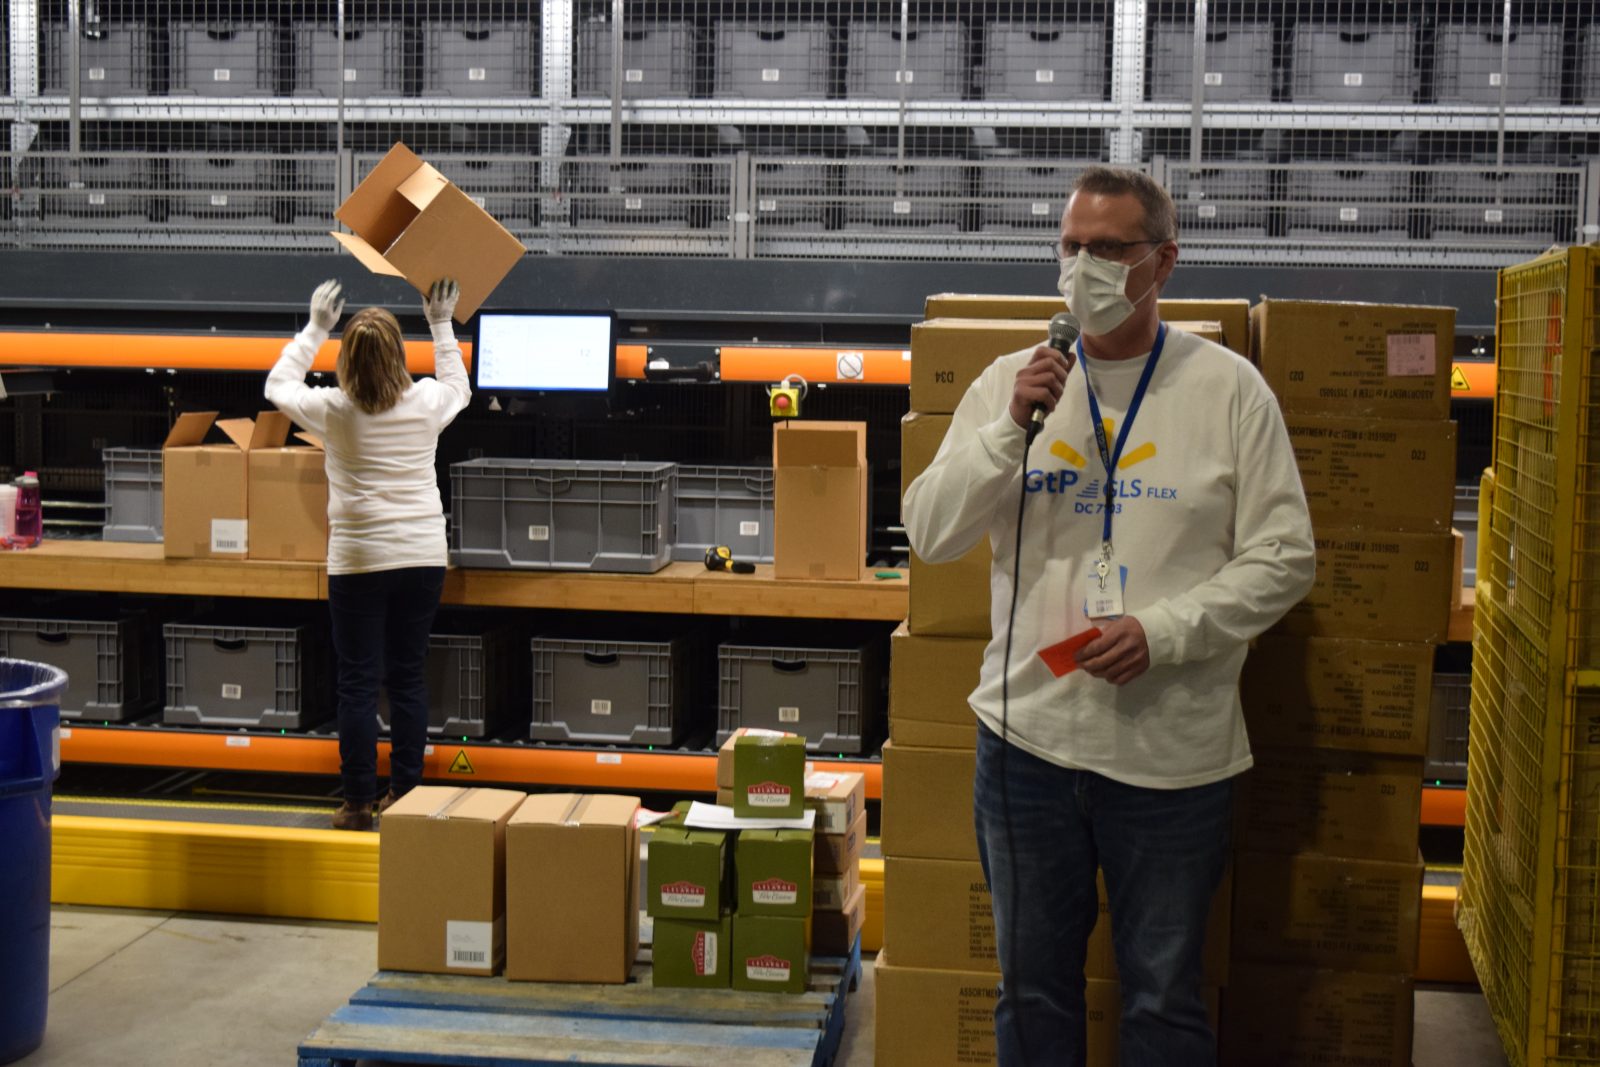 Walmart Canada launches new technology at Cornwall warehouse